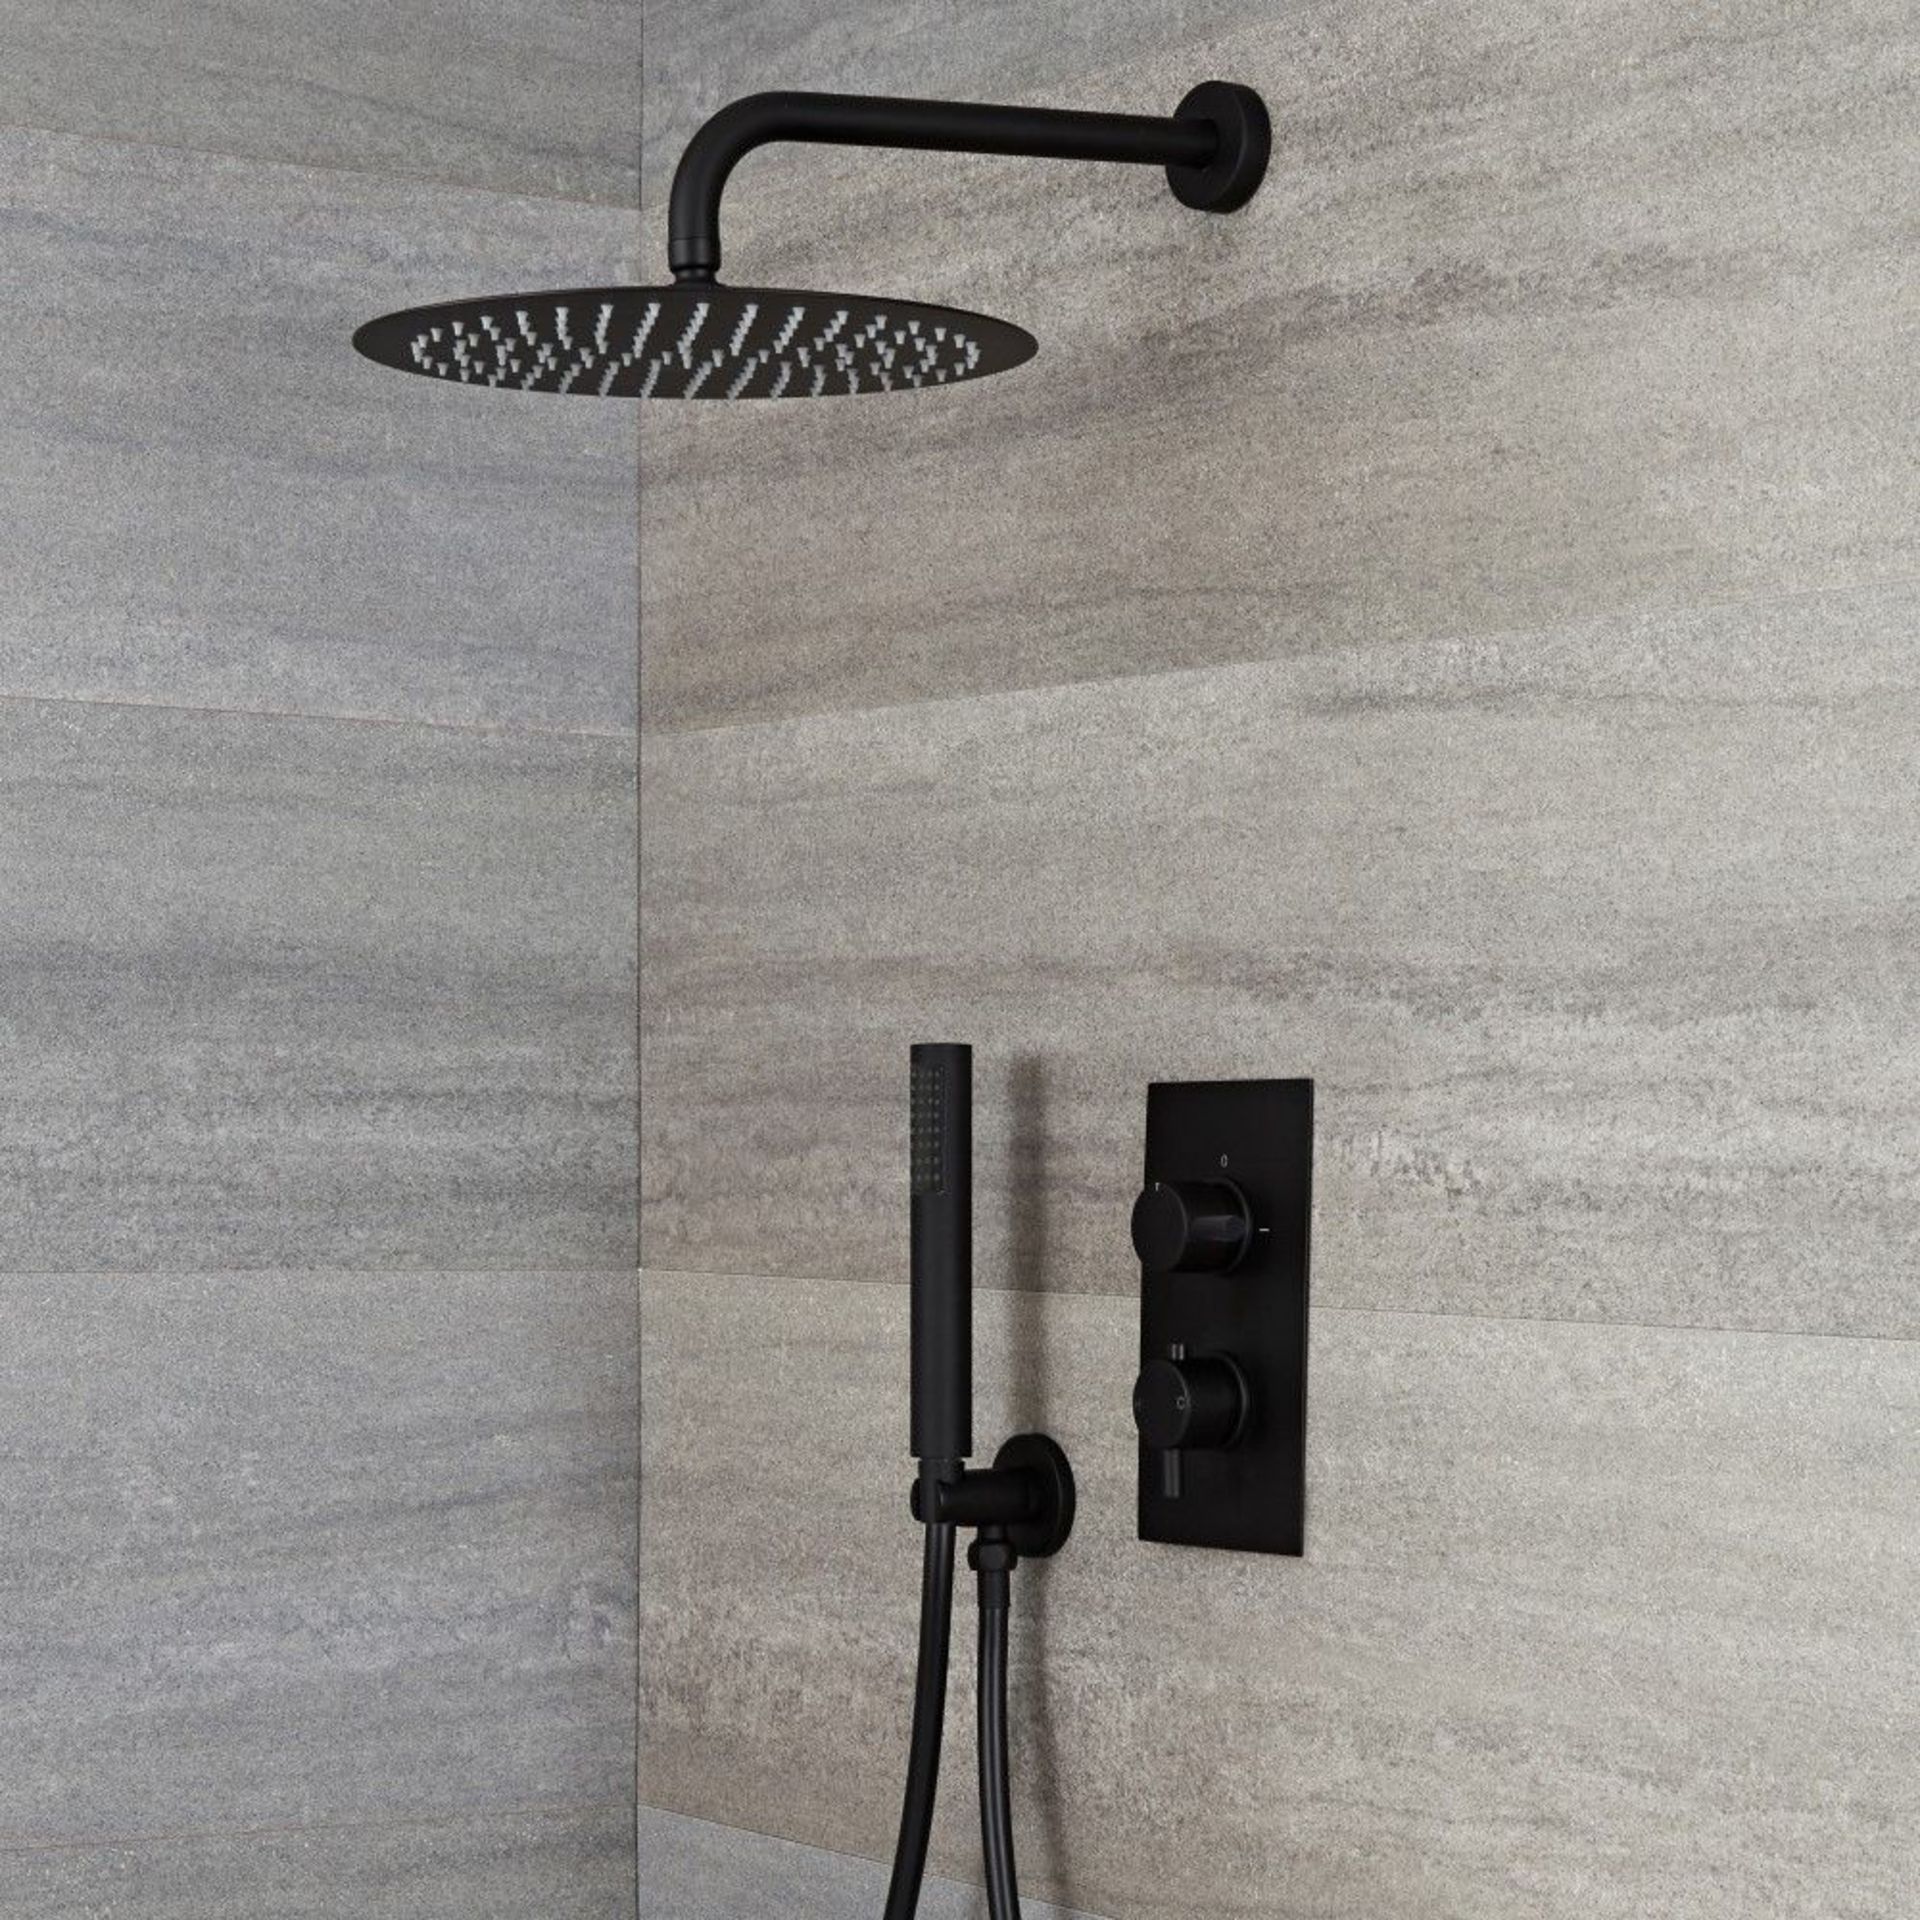 New & Boxed Round Concealed Thermostatic Mixer Shower Kit & Large Head, Matte Black. RRP £49...